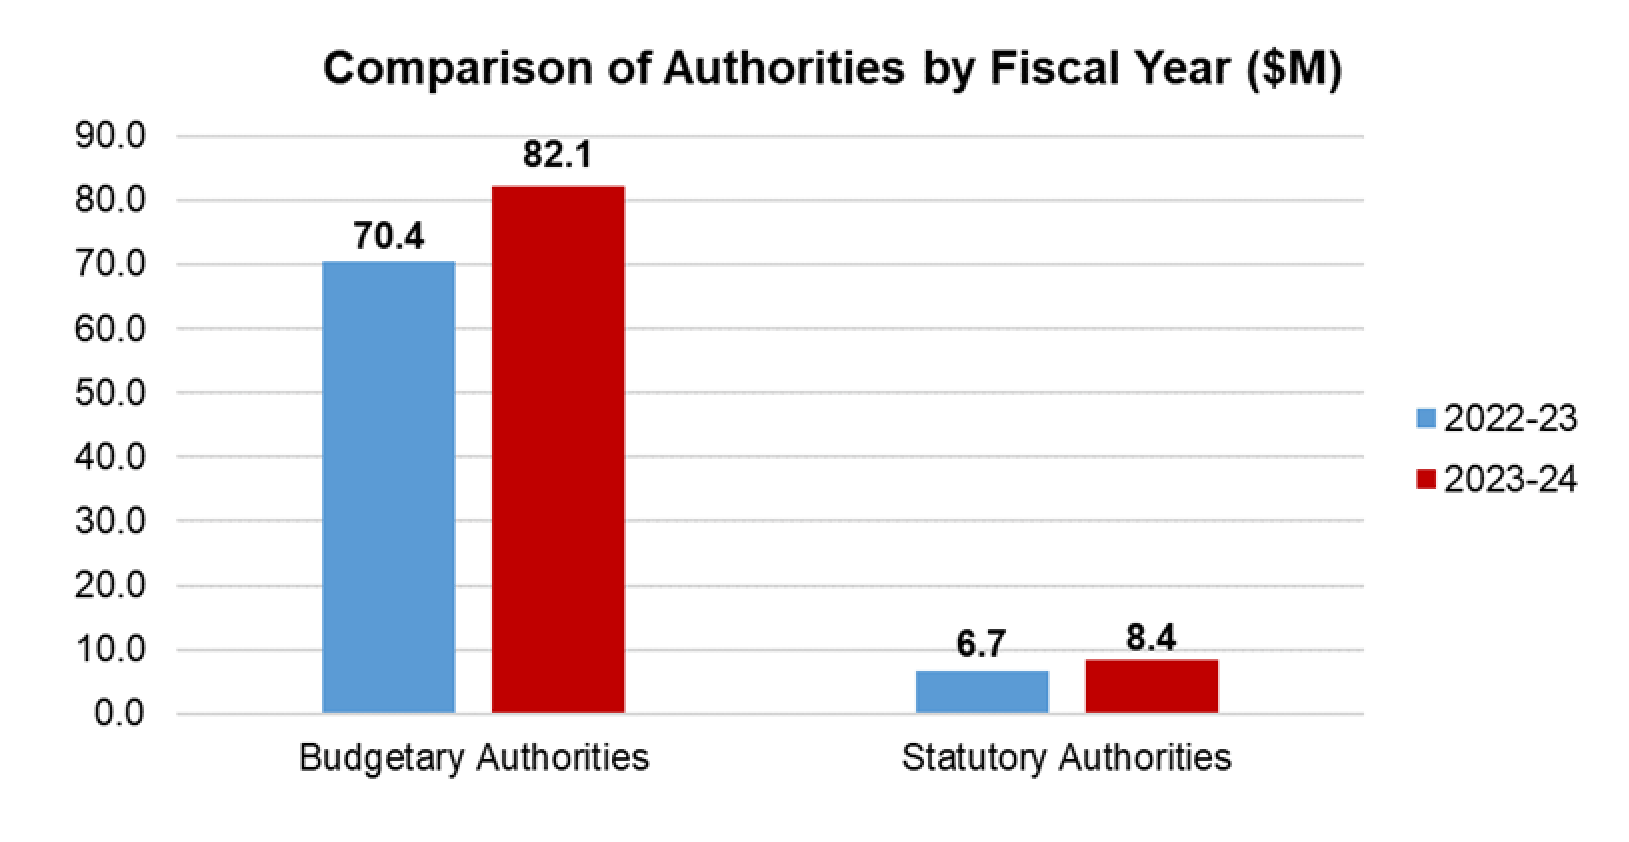 Comparison of Authorities by Fiscal Year ($M). Budgetary Authorities 70.4 in 2022-23, 82.1 in 2023-24. Statutory Authorities 6.7 in 2022-23 and 8.4 in 2023-24.